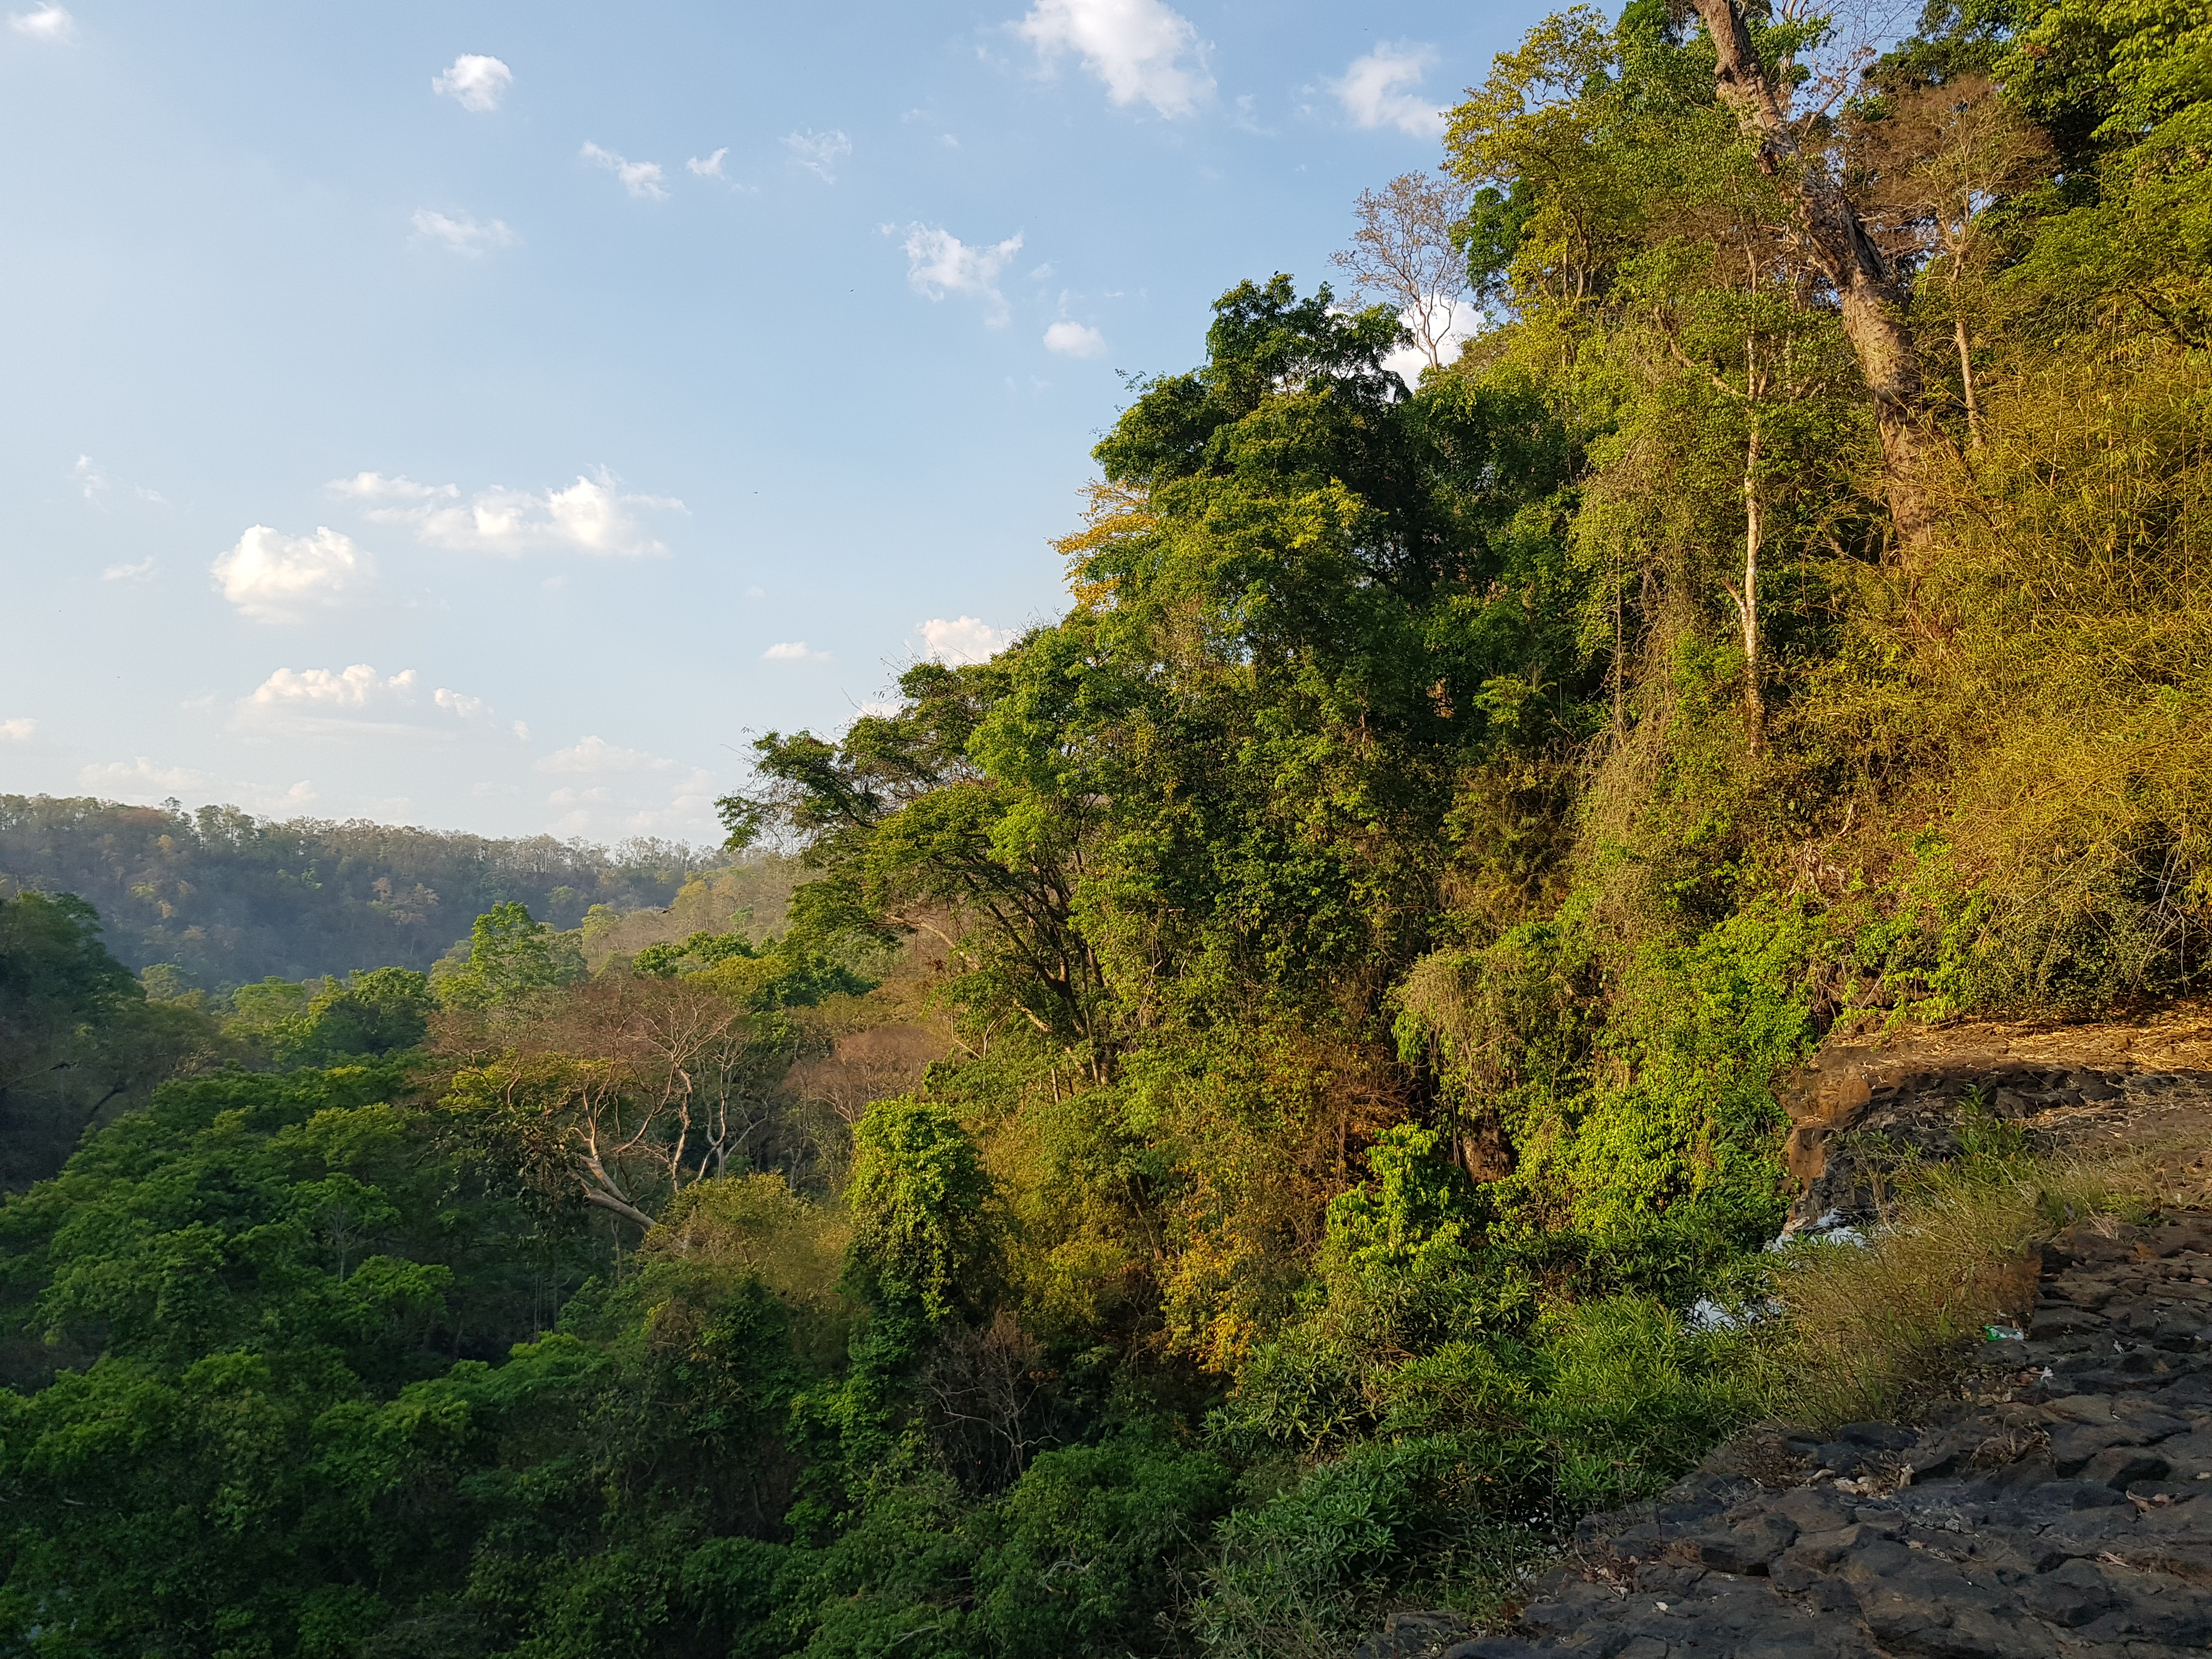 Mondulkiri province: This verdant landscape is nevertheless highly vulnerable to changing rainfall patterns due to a dependency on smallholder agriculture.